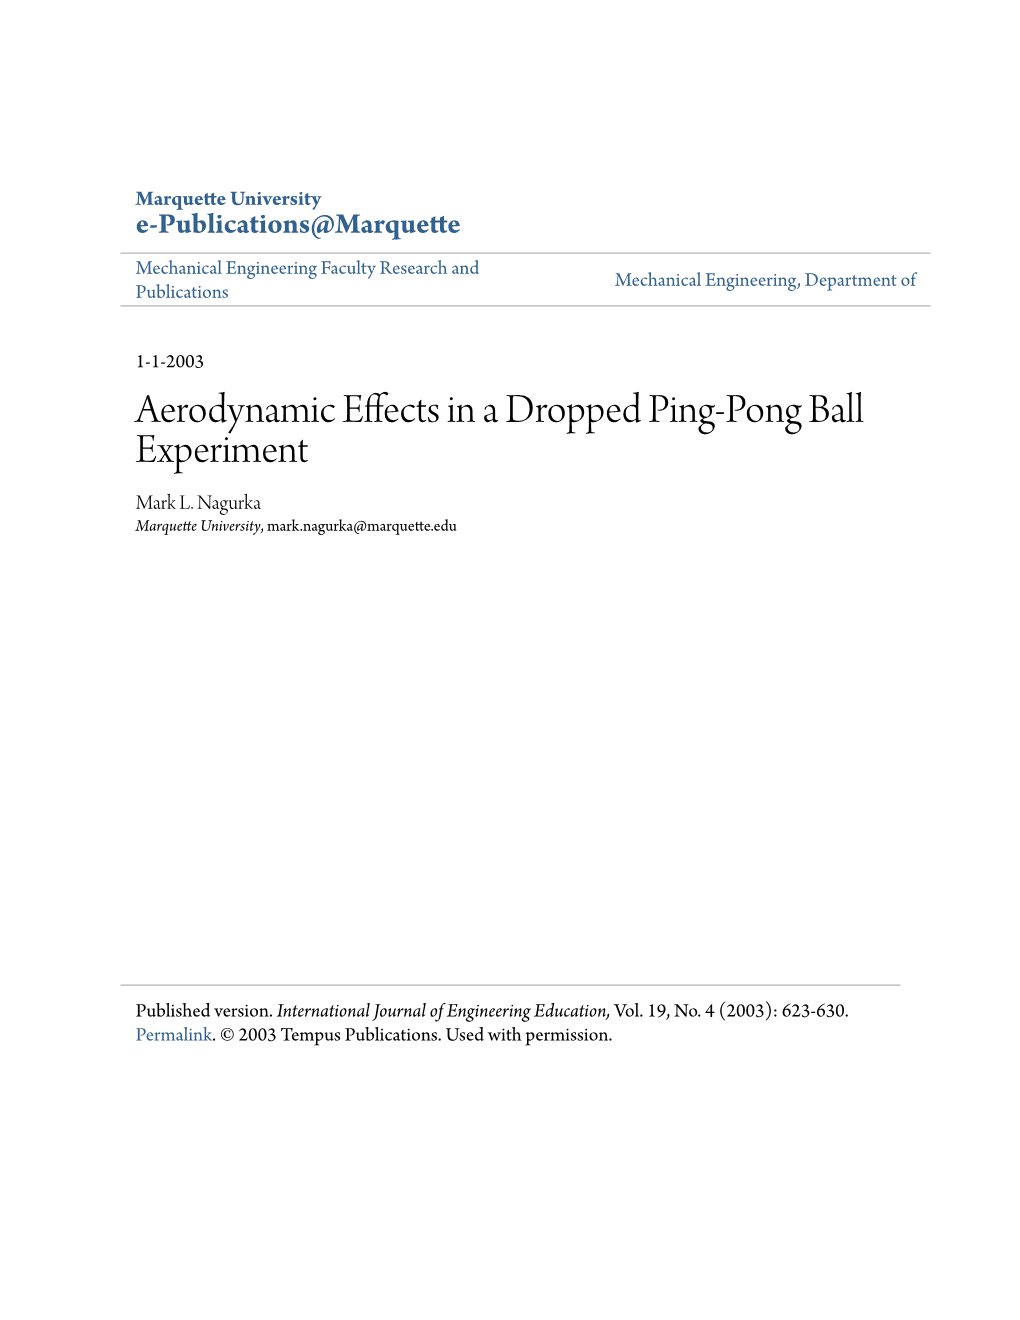 Aerodynamic Effects in a Dropped Ping-Pong Ball Experiment Mark L